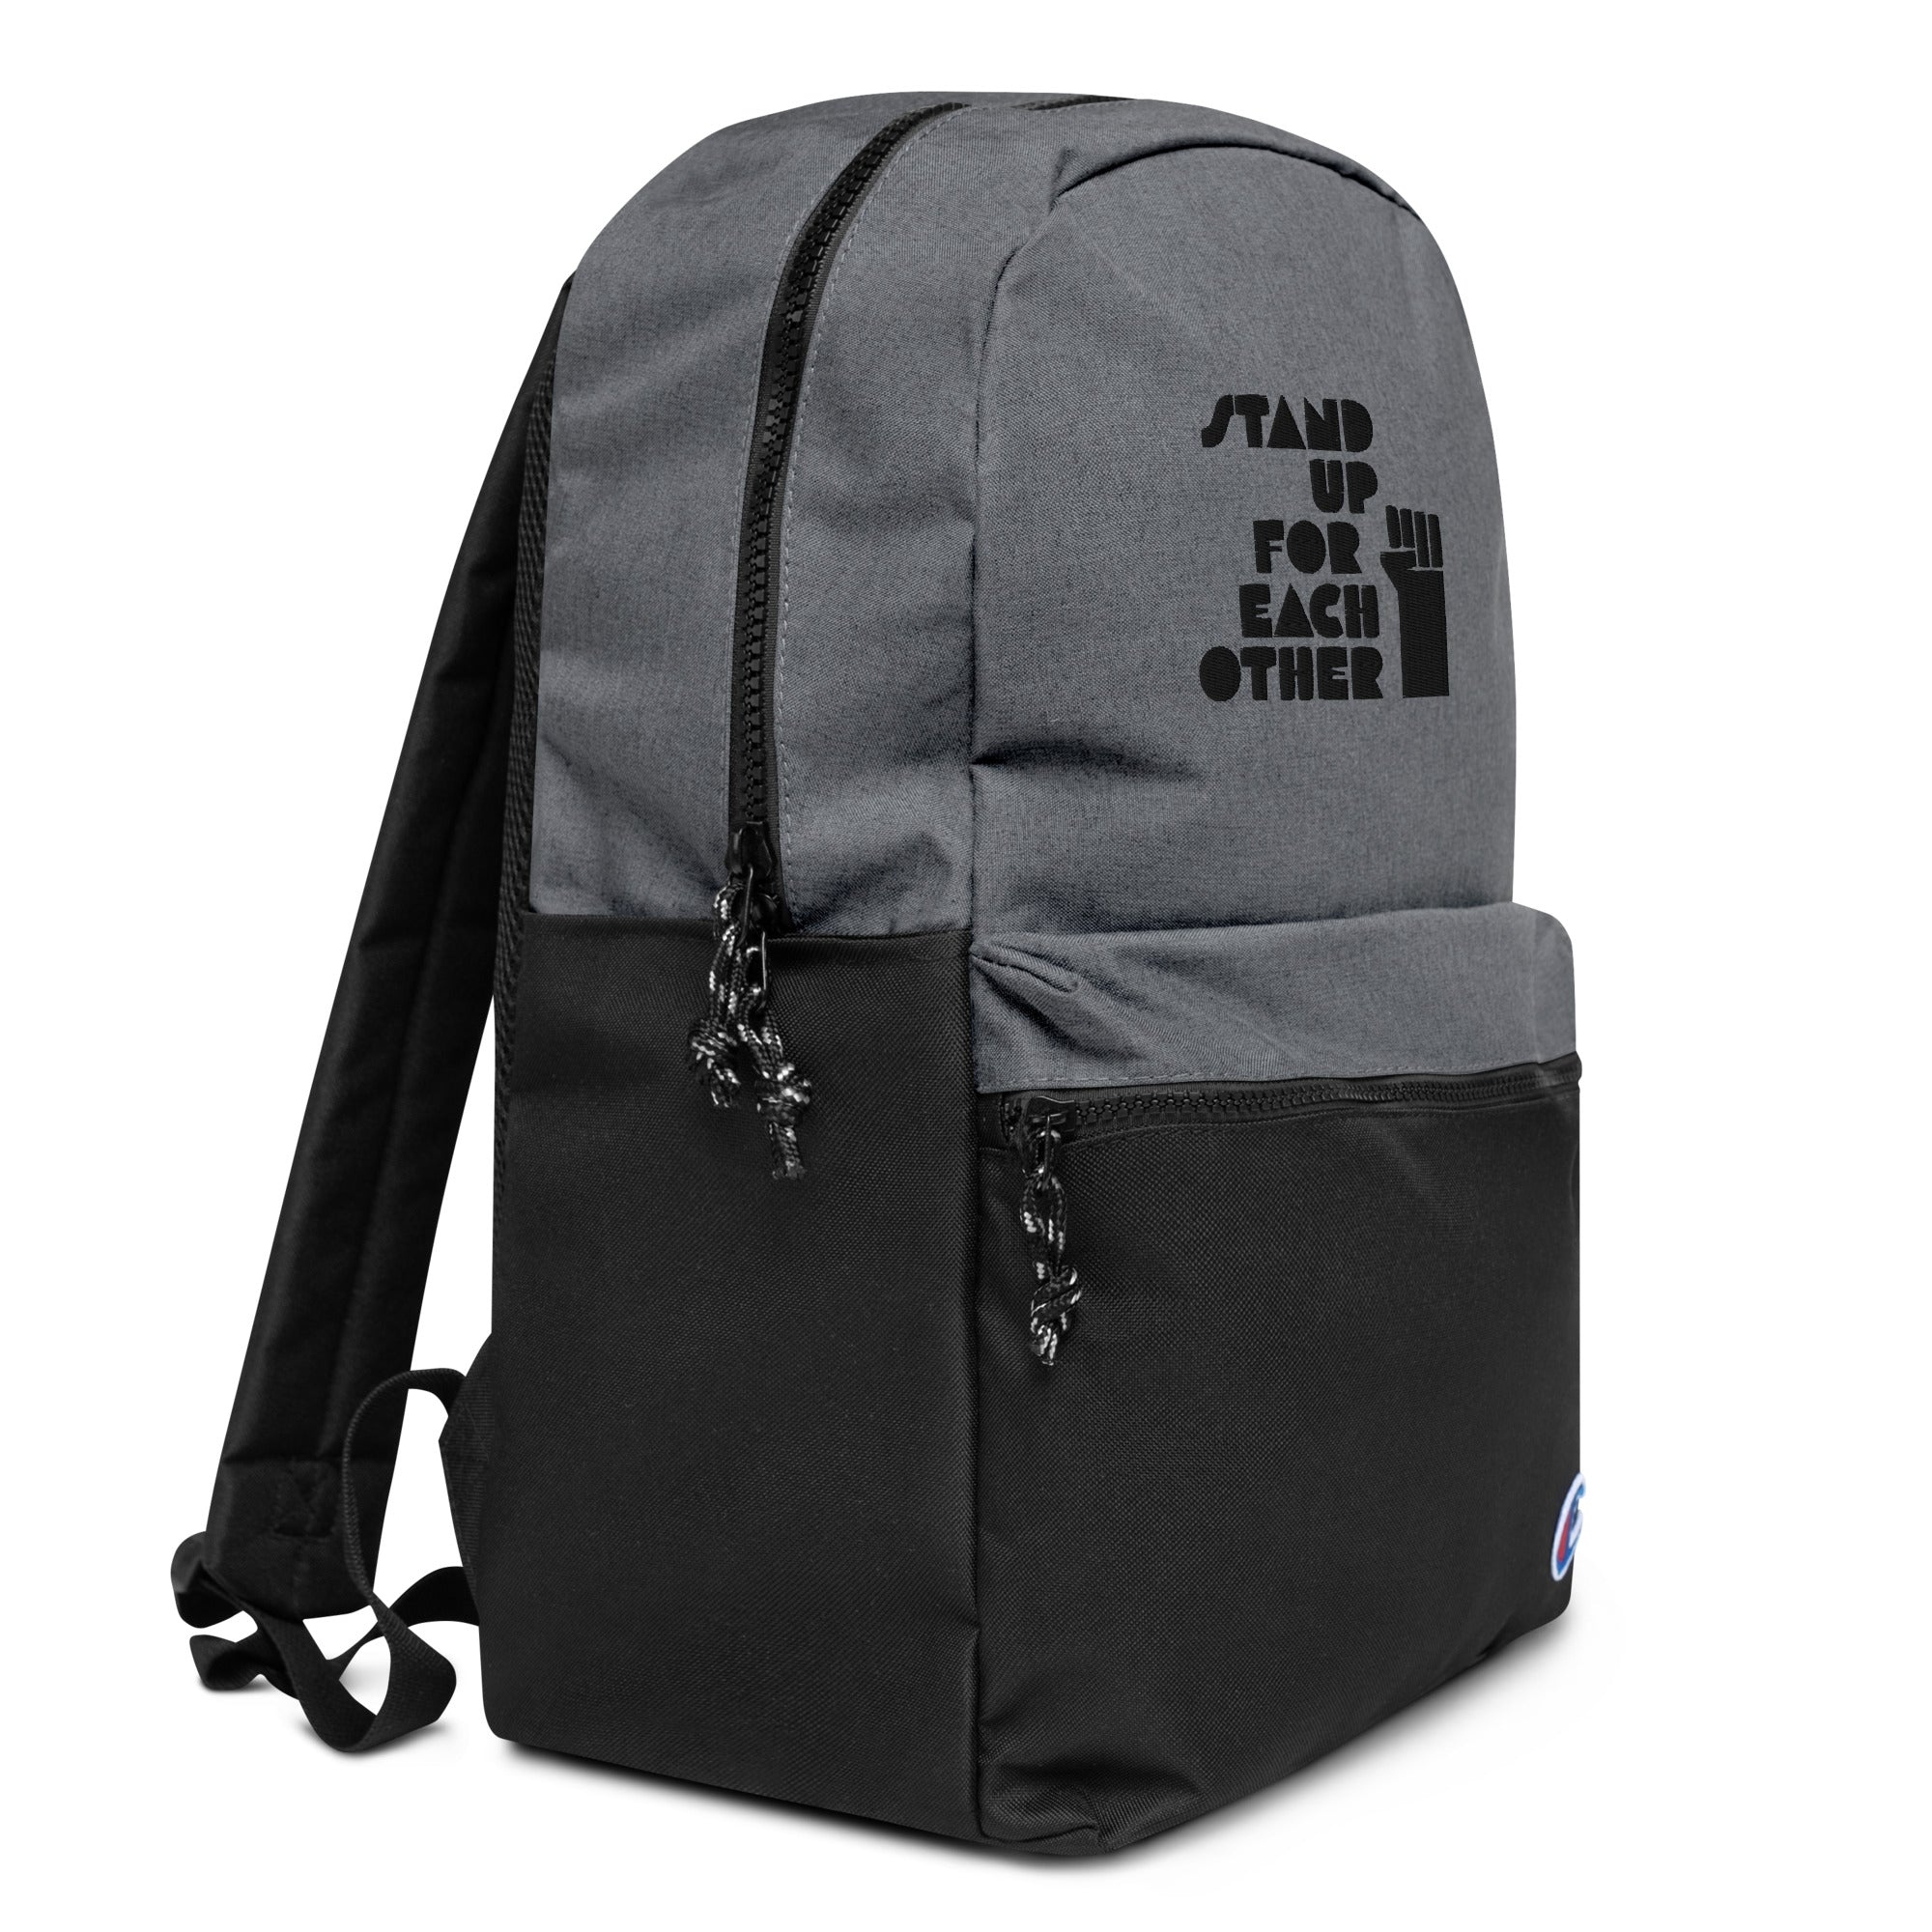 Stand Up For Each Other Social Justice Embroidered Champion Backpack